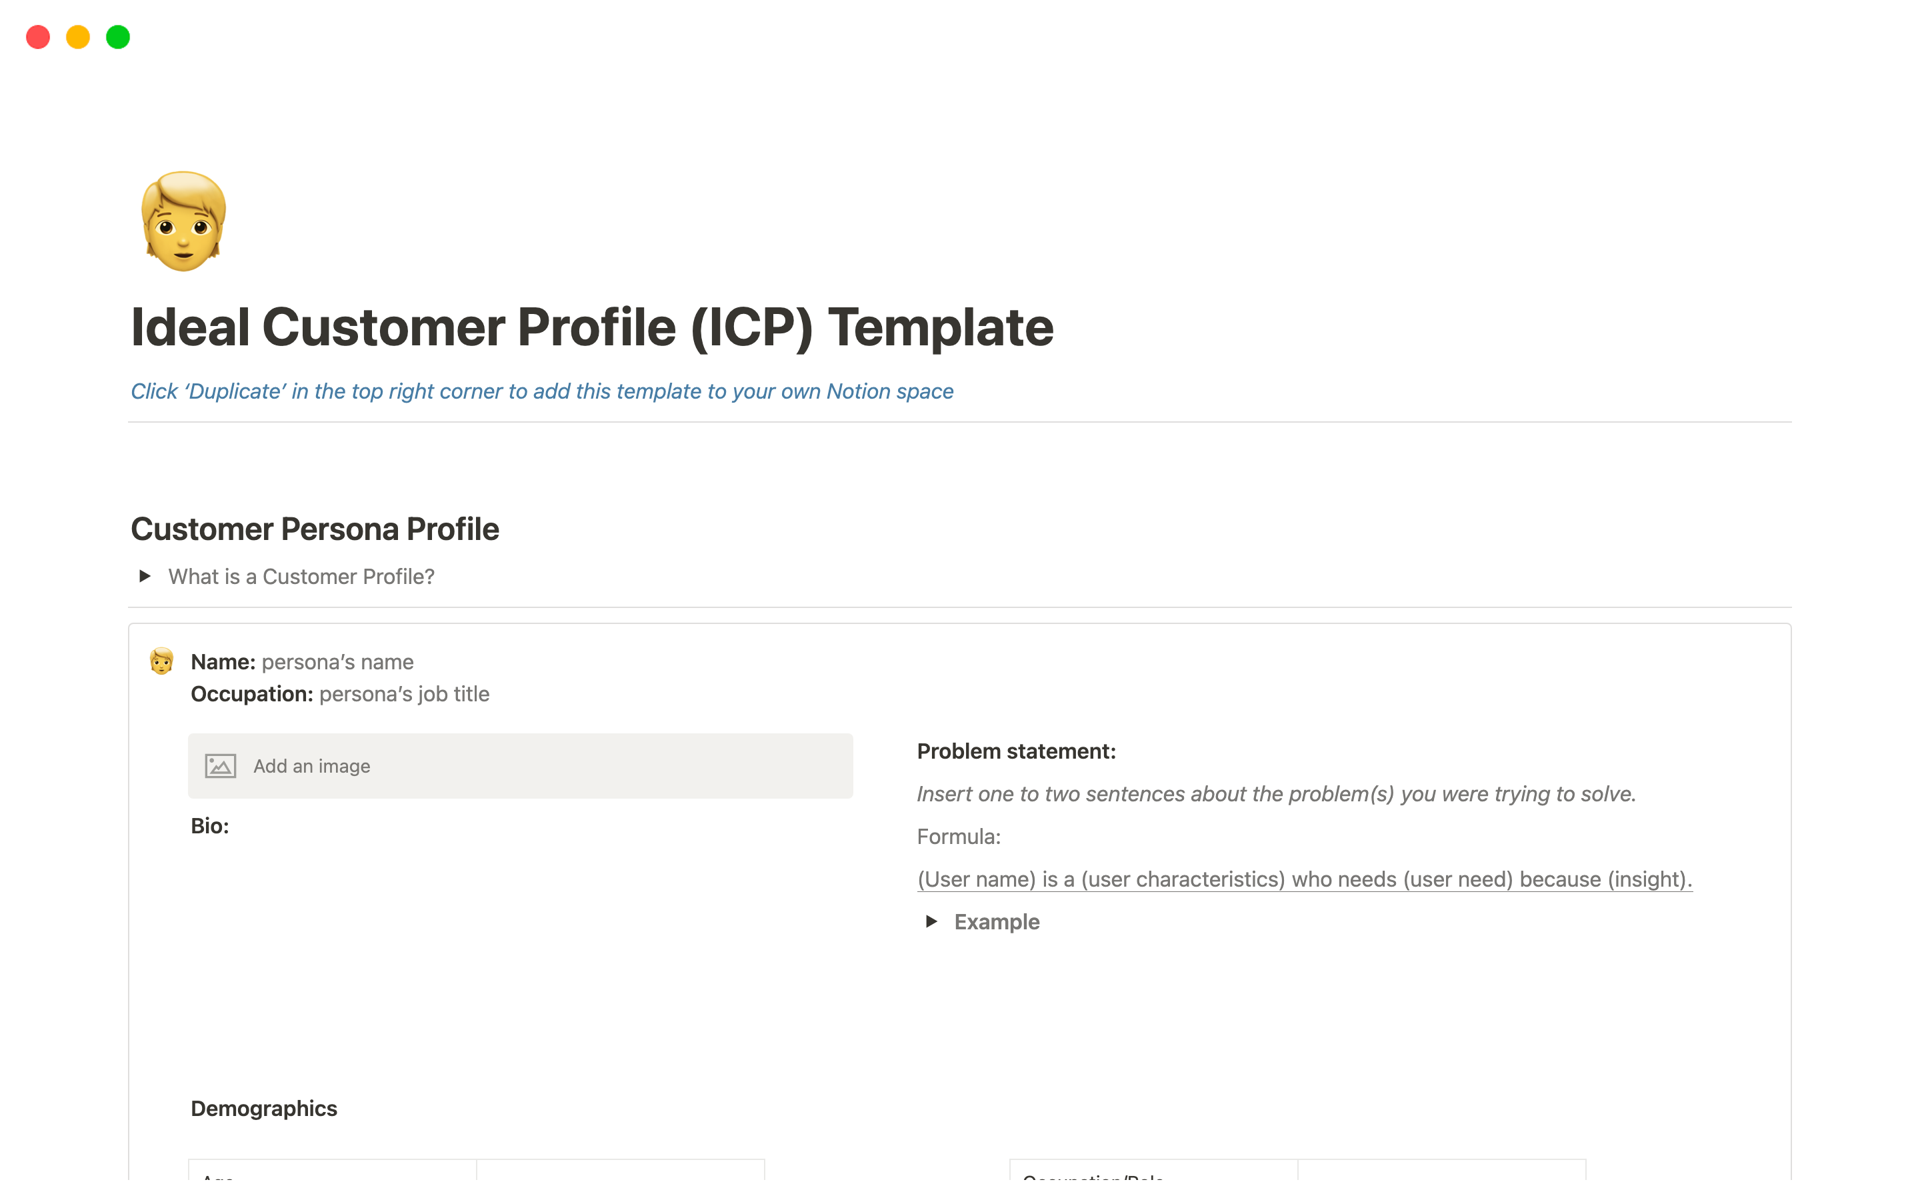 A template preview for Ideal Customer Profile (ICP)